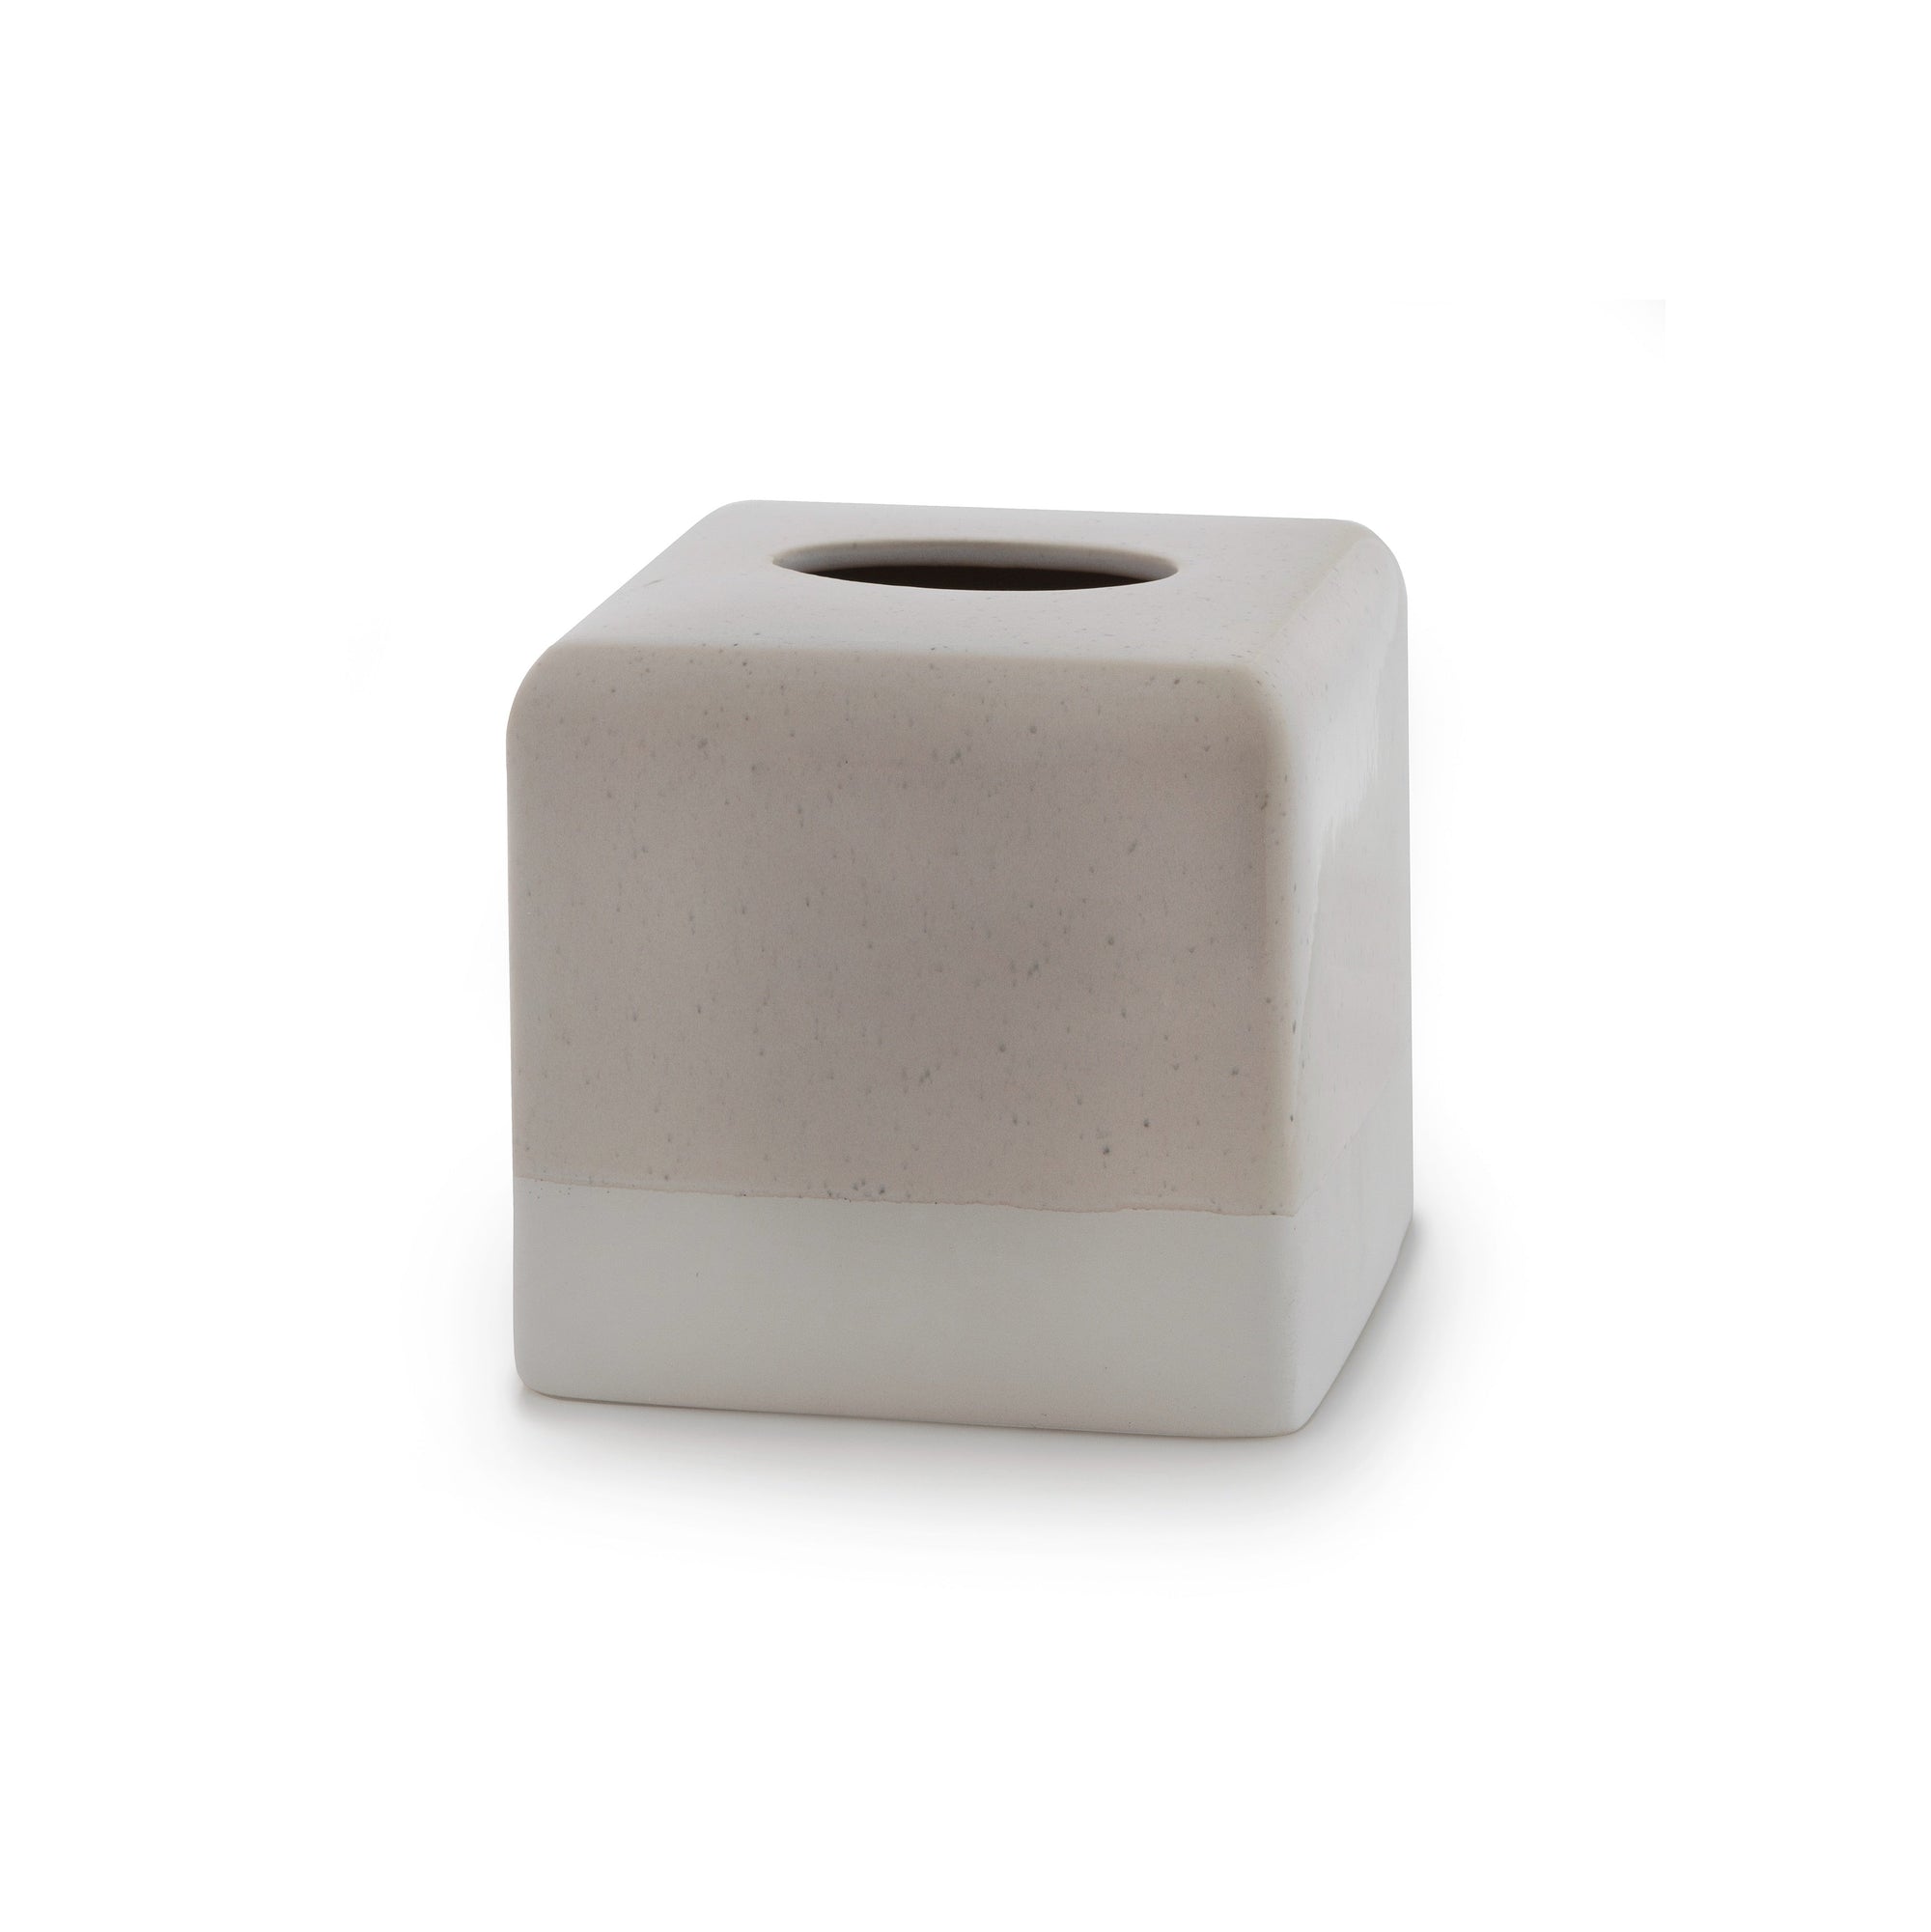 Culver Bath Accessories | Kassatex Tissue Box Cover at Fig Linens and Home